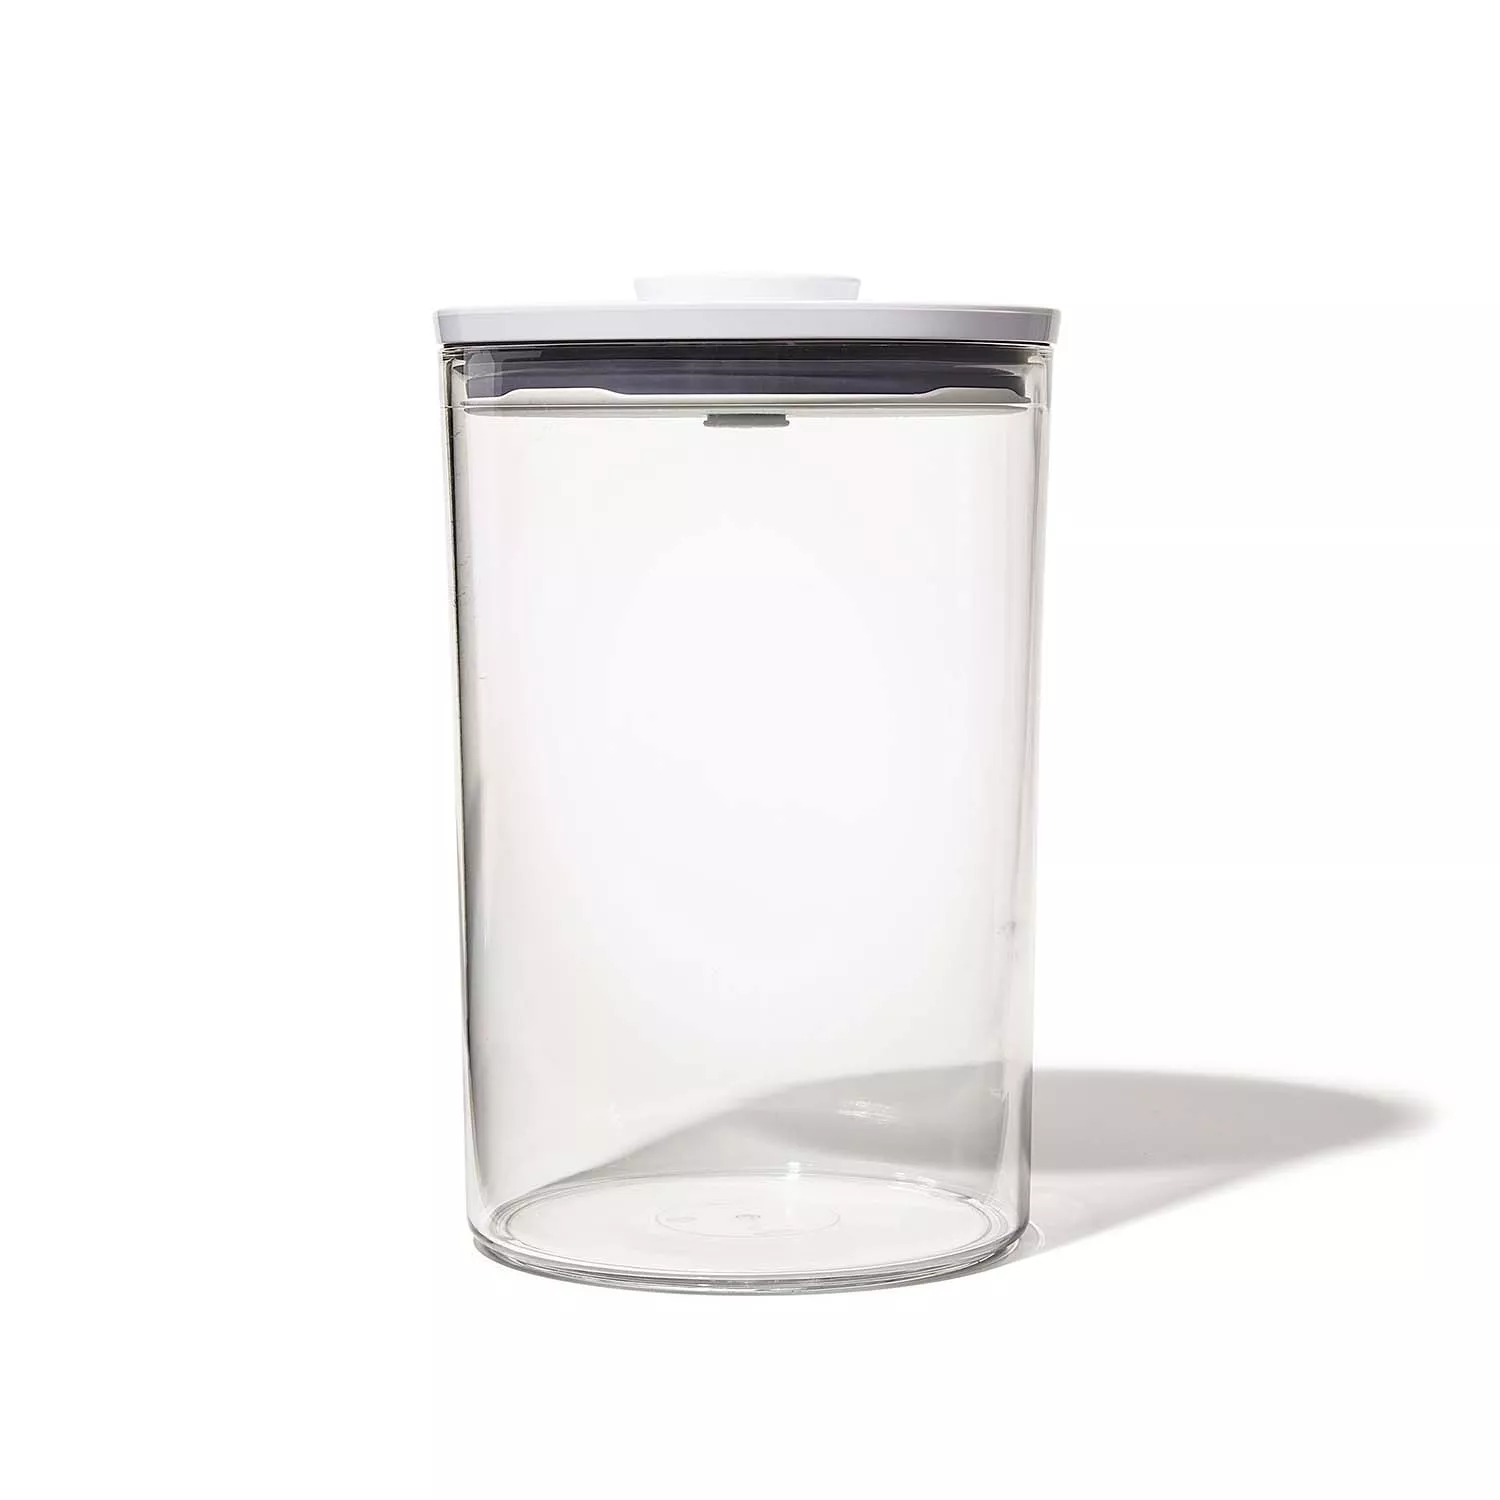 OXO Good Grips 1.5 qt. Square Food Storage POP Container